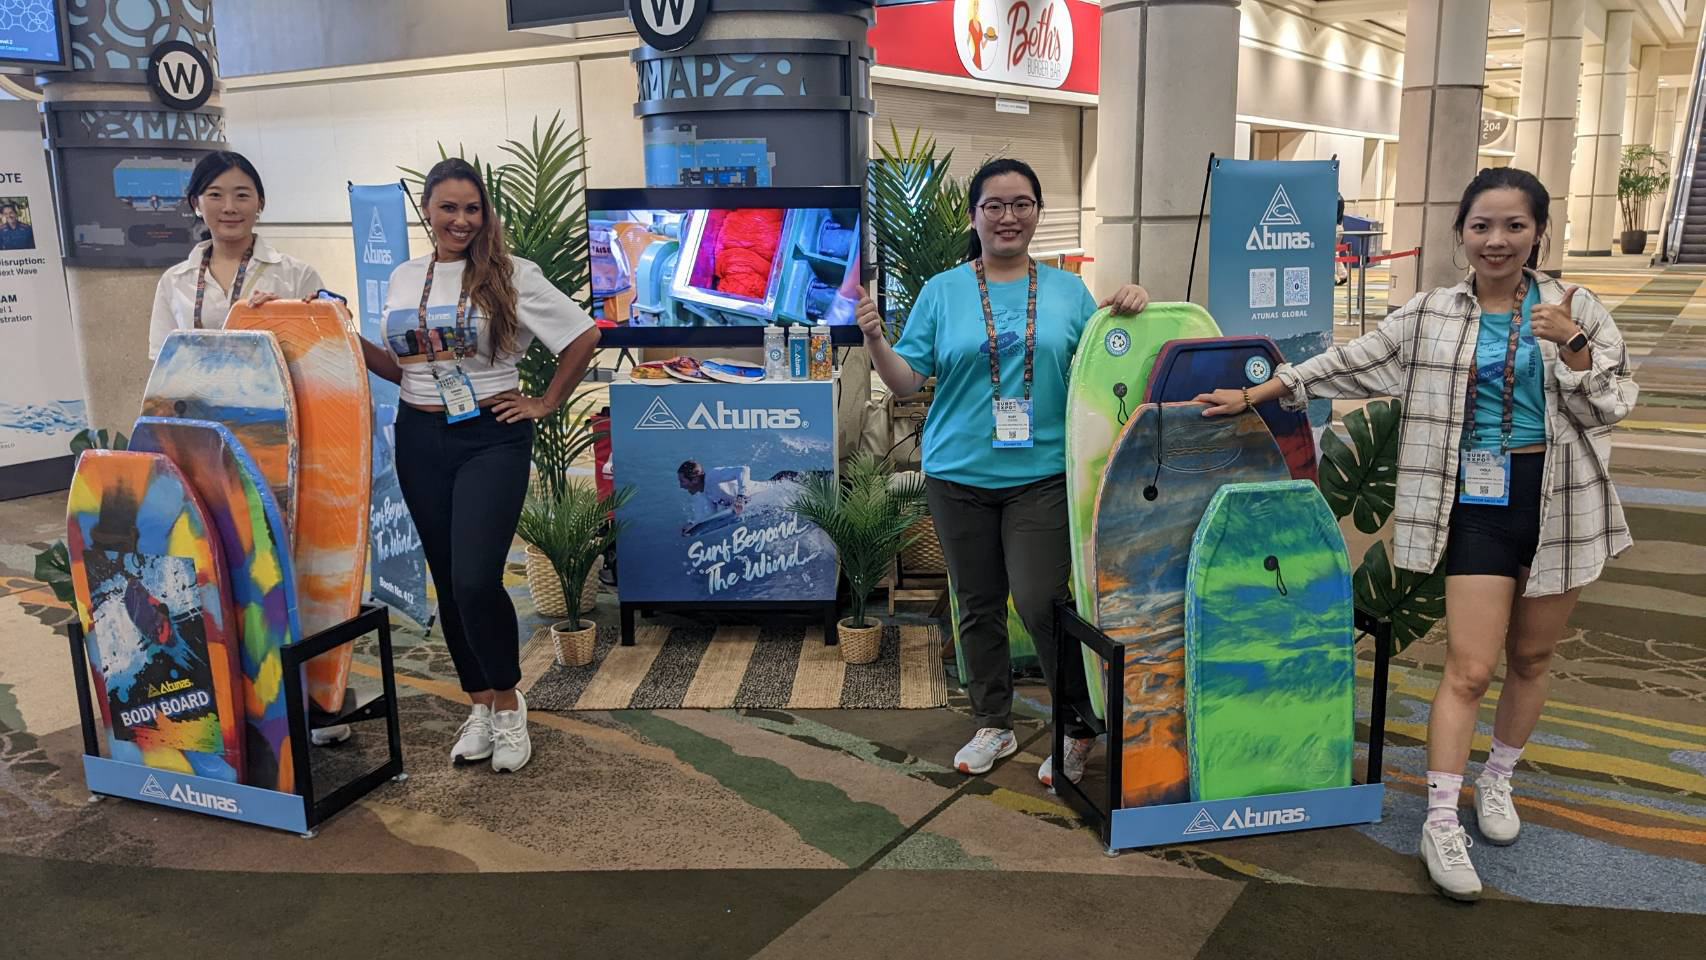 PSM EVENT IN SURF EXPO 2022 | The post-show mixer showcases ATUNAS bodyboards in the main entrance in the surf expo hall.